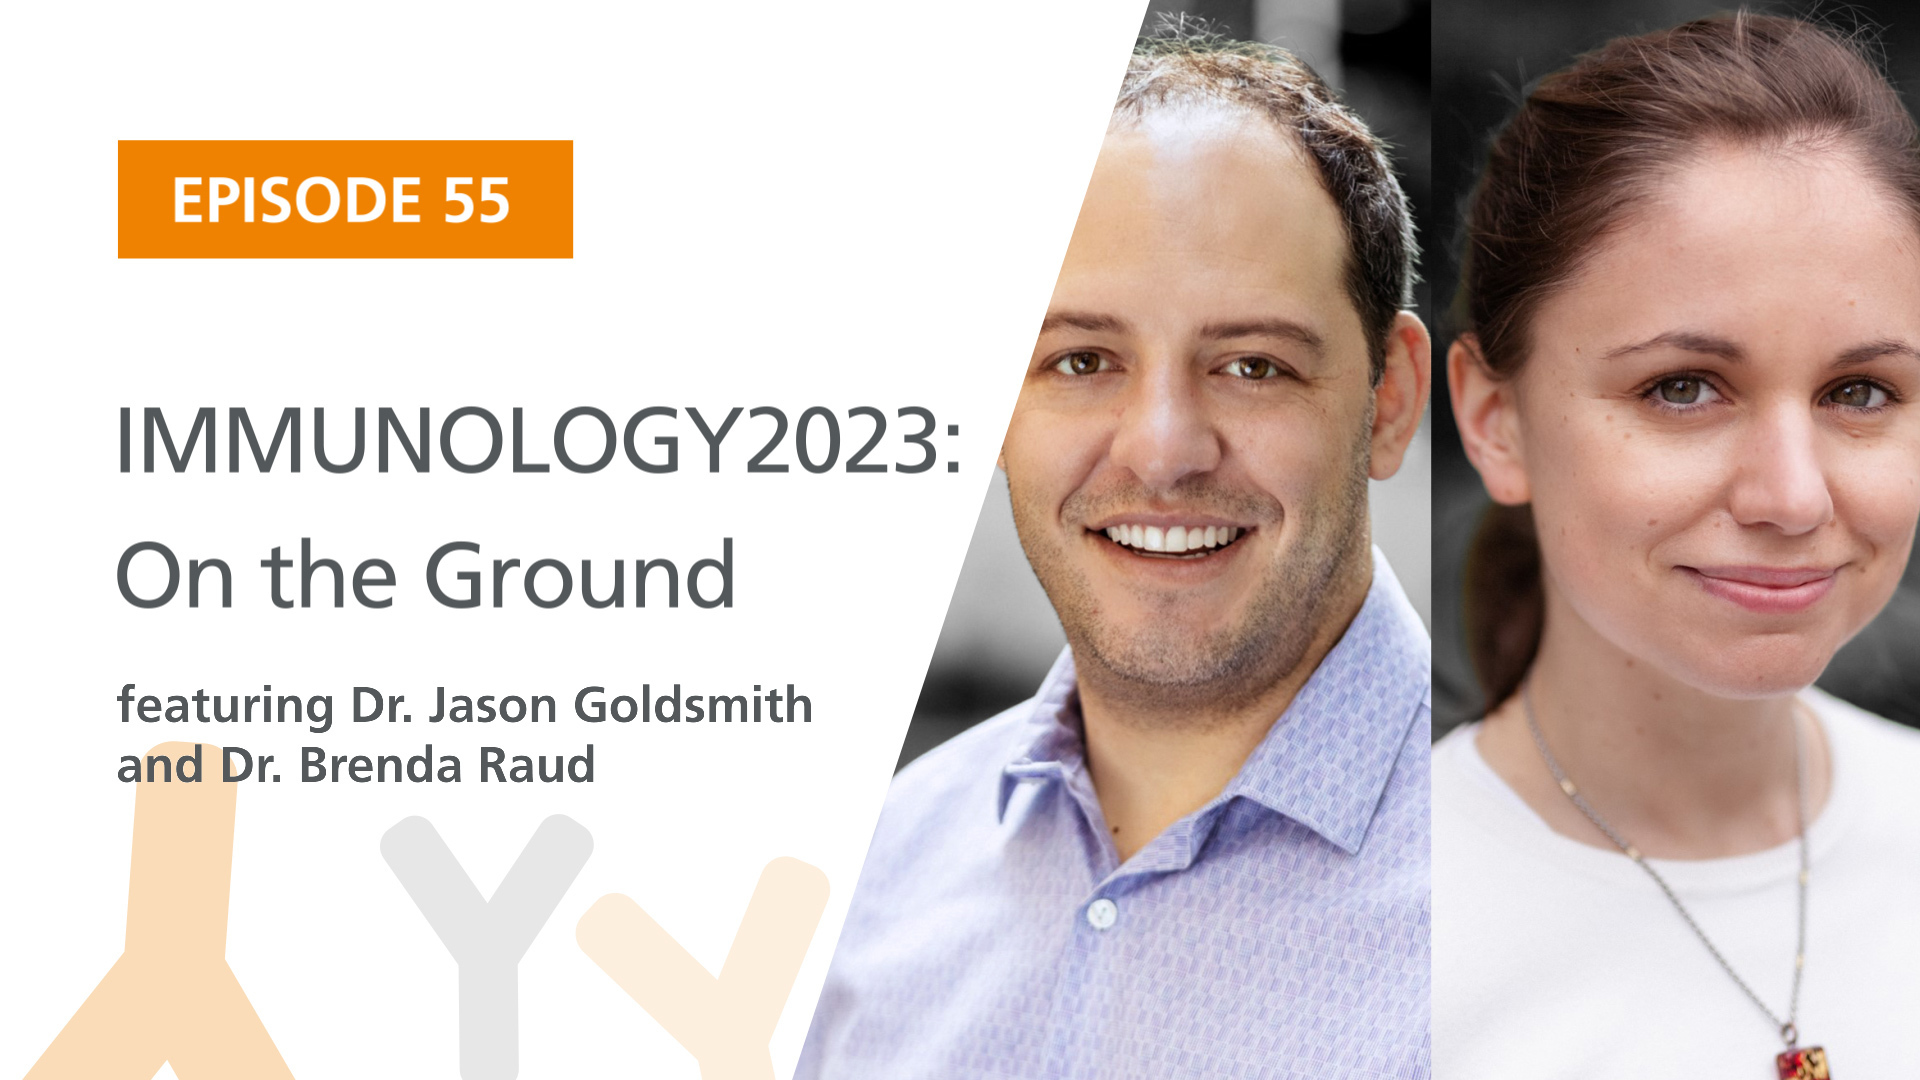 IMMUNOLOGY2023: On the Ground